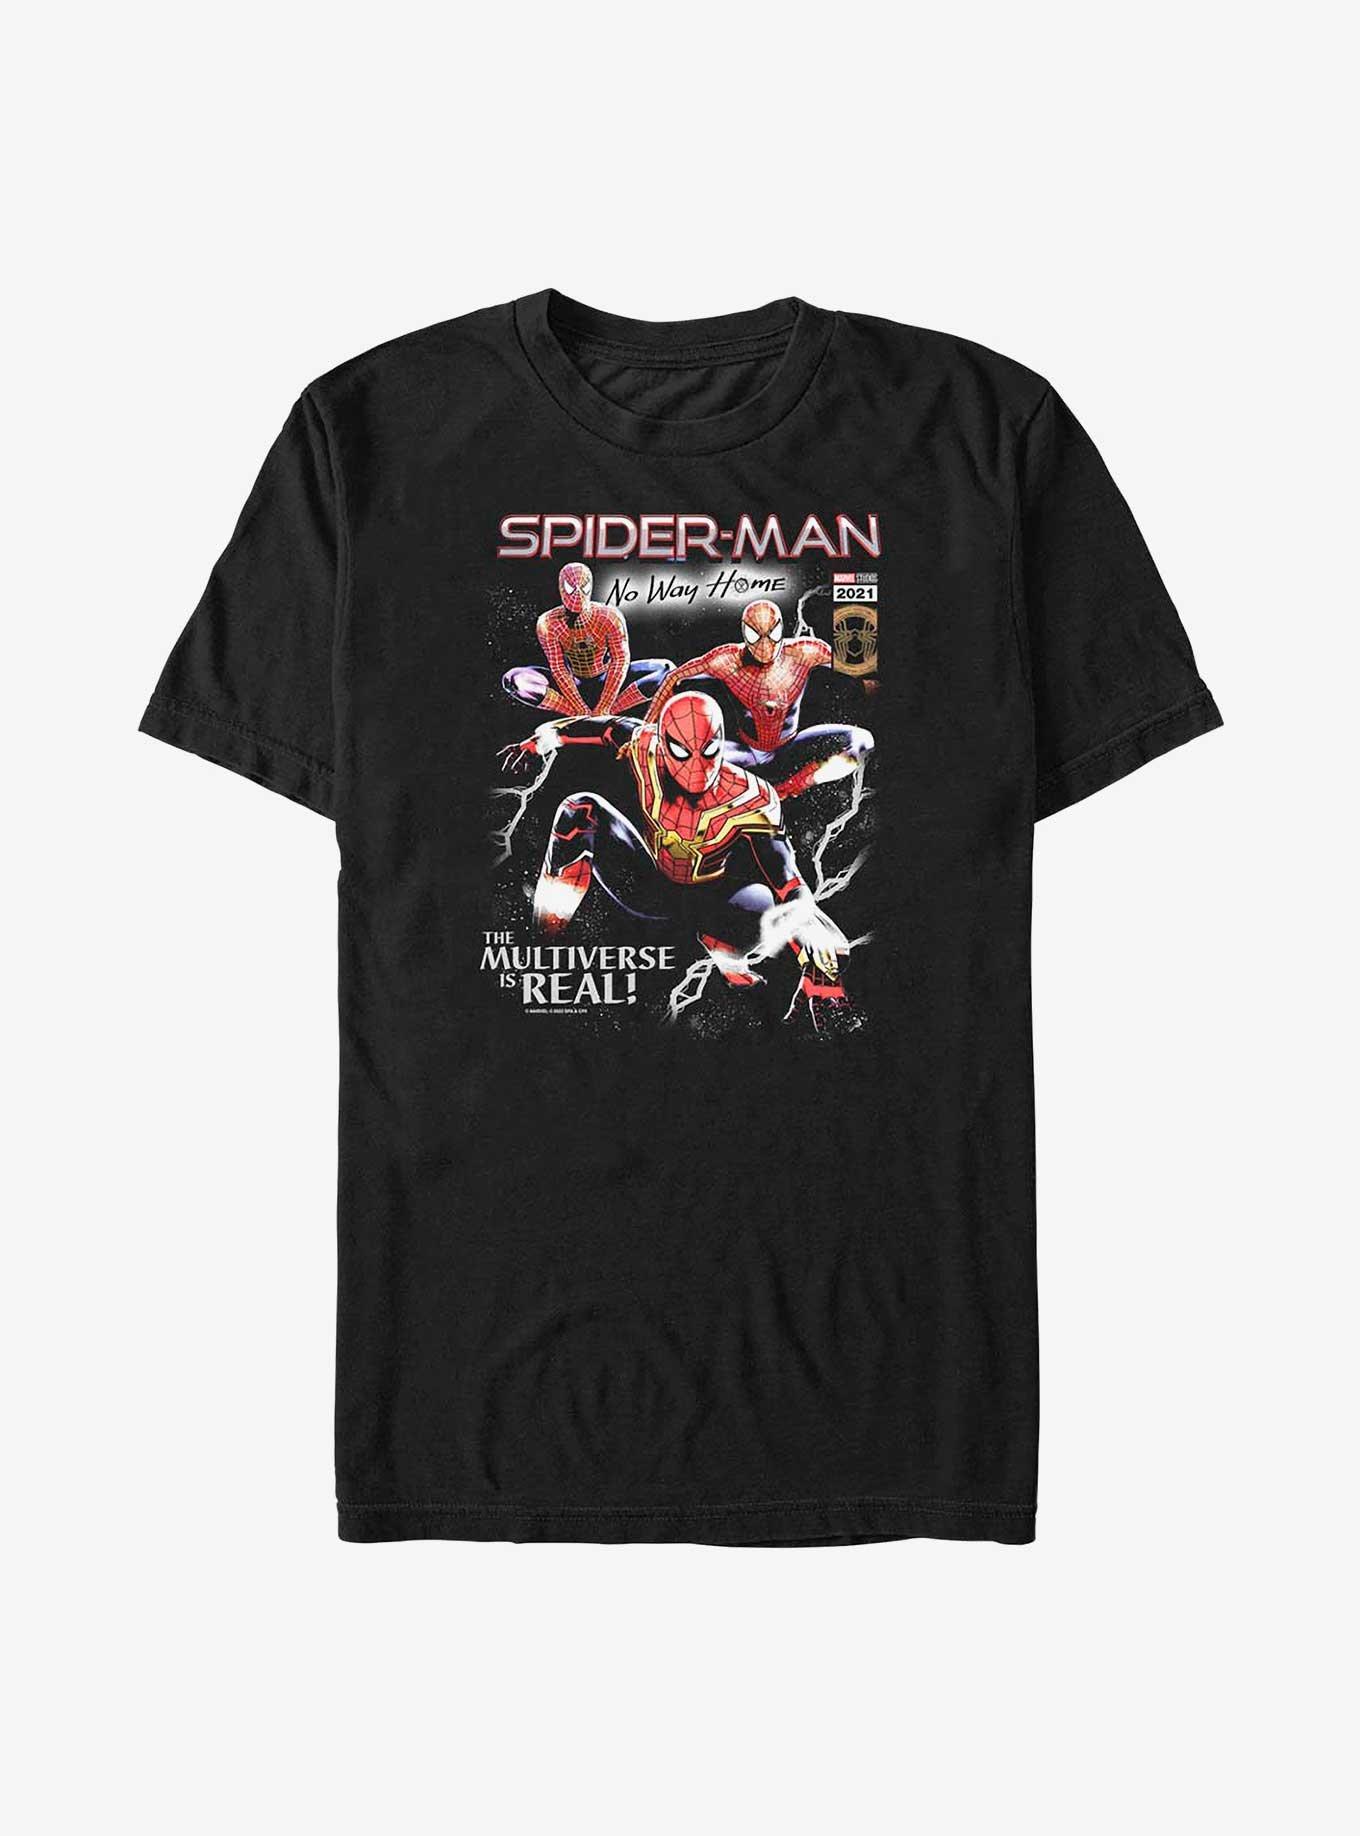 Spider-Man Men's Web Walk Graphic Tee with Short Sleeves, Size S-3XL